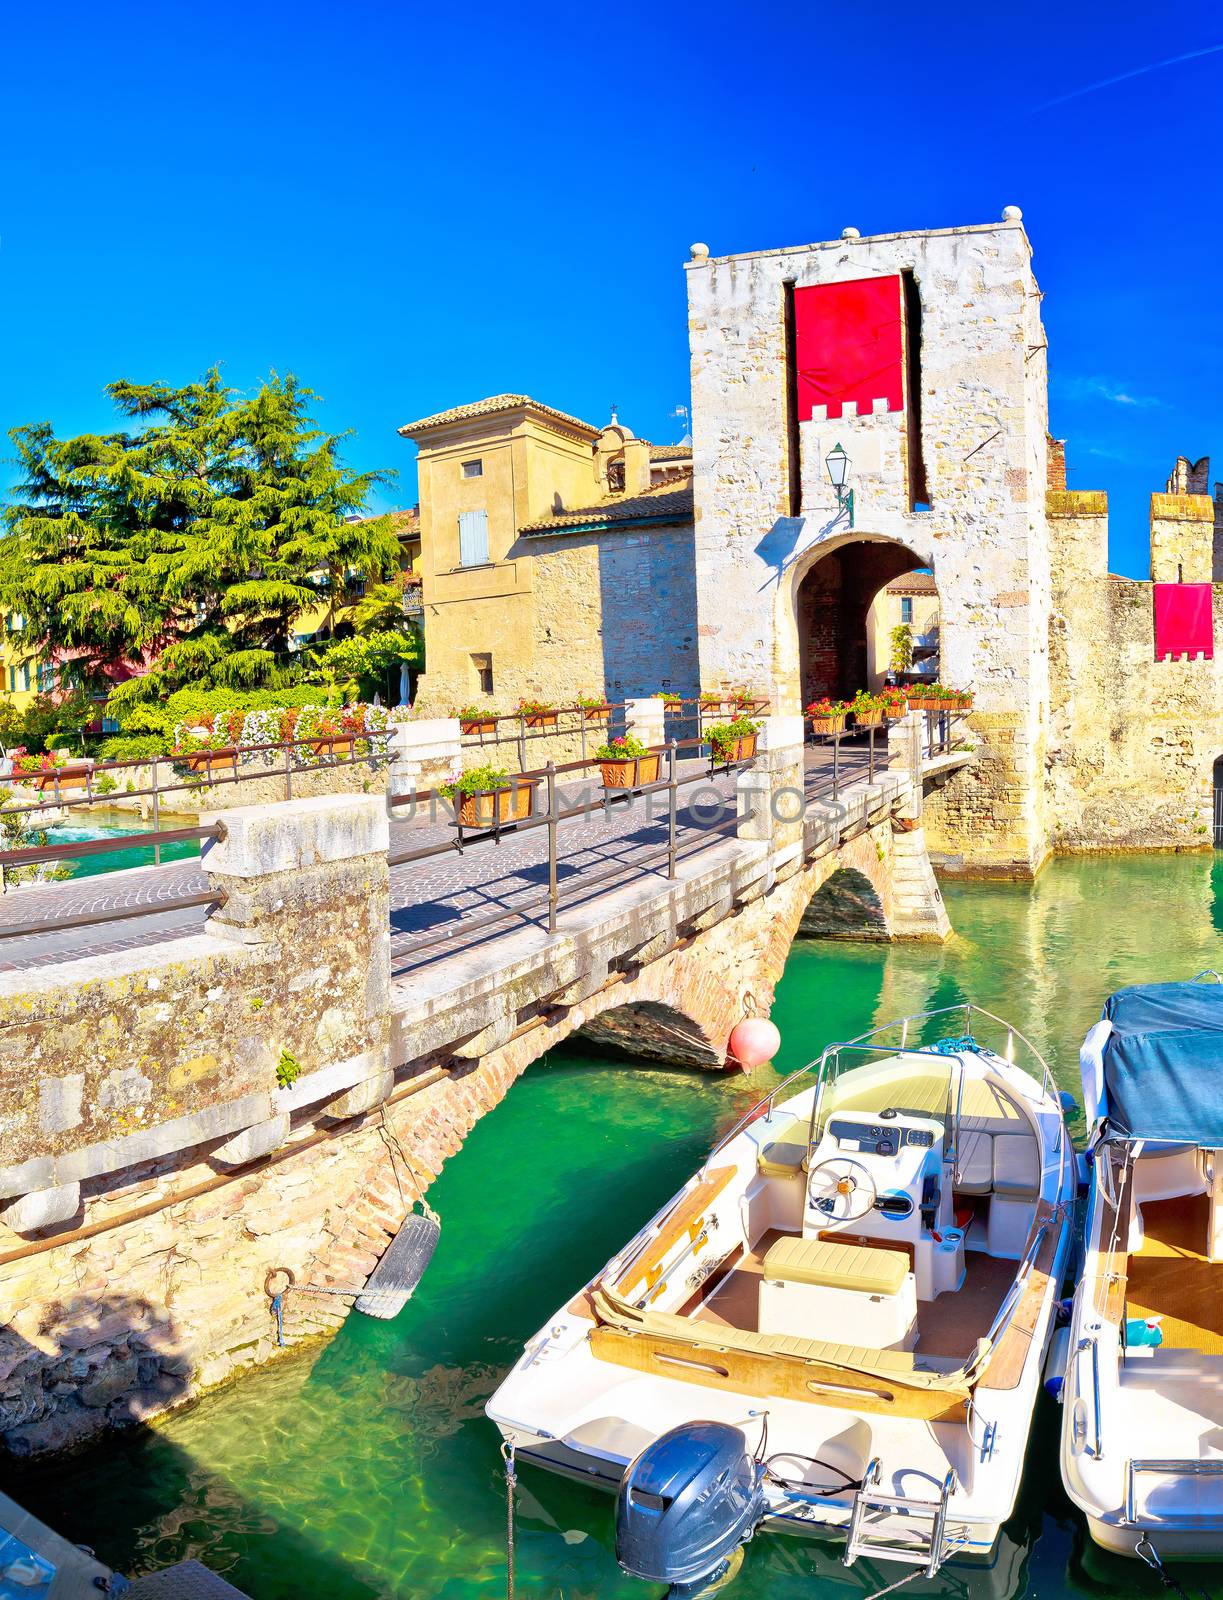 Town of Sirmione entrance walls view by xbrchx